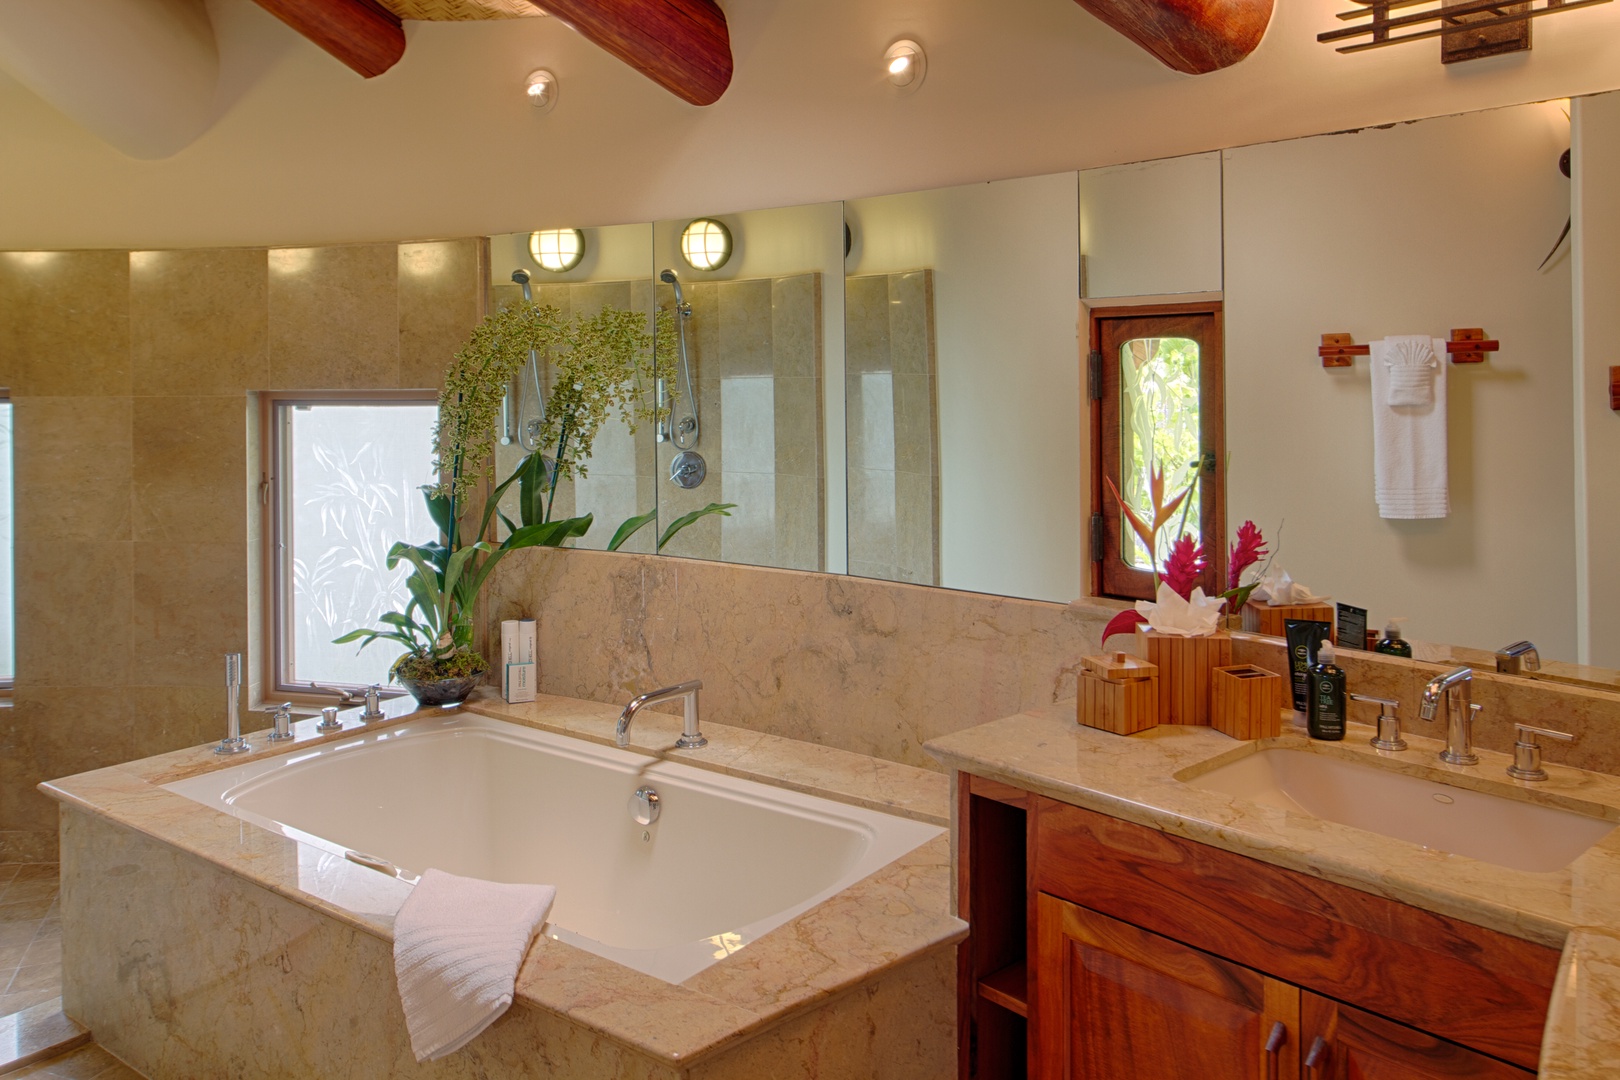 Kailua Vacation Rentals, Paul Mitchell Estate- 5 Bedroom* - Primary Bath in Main House